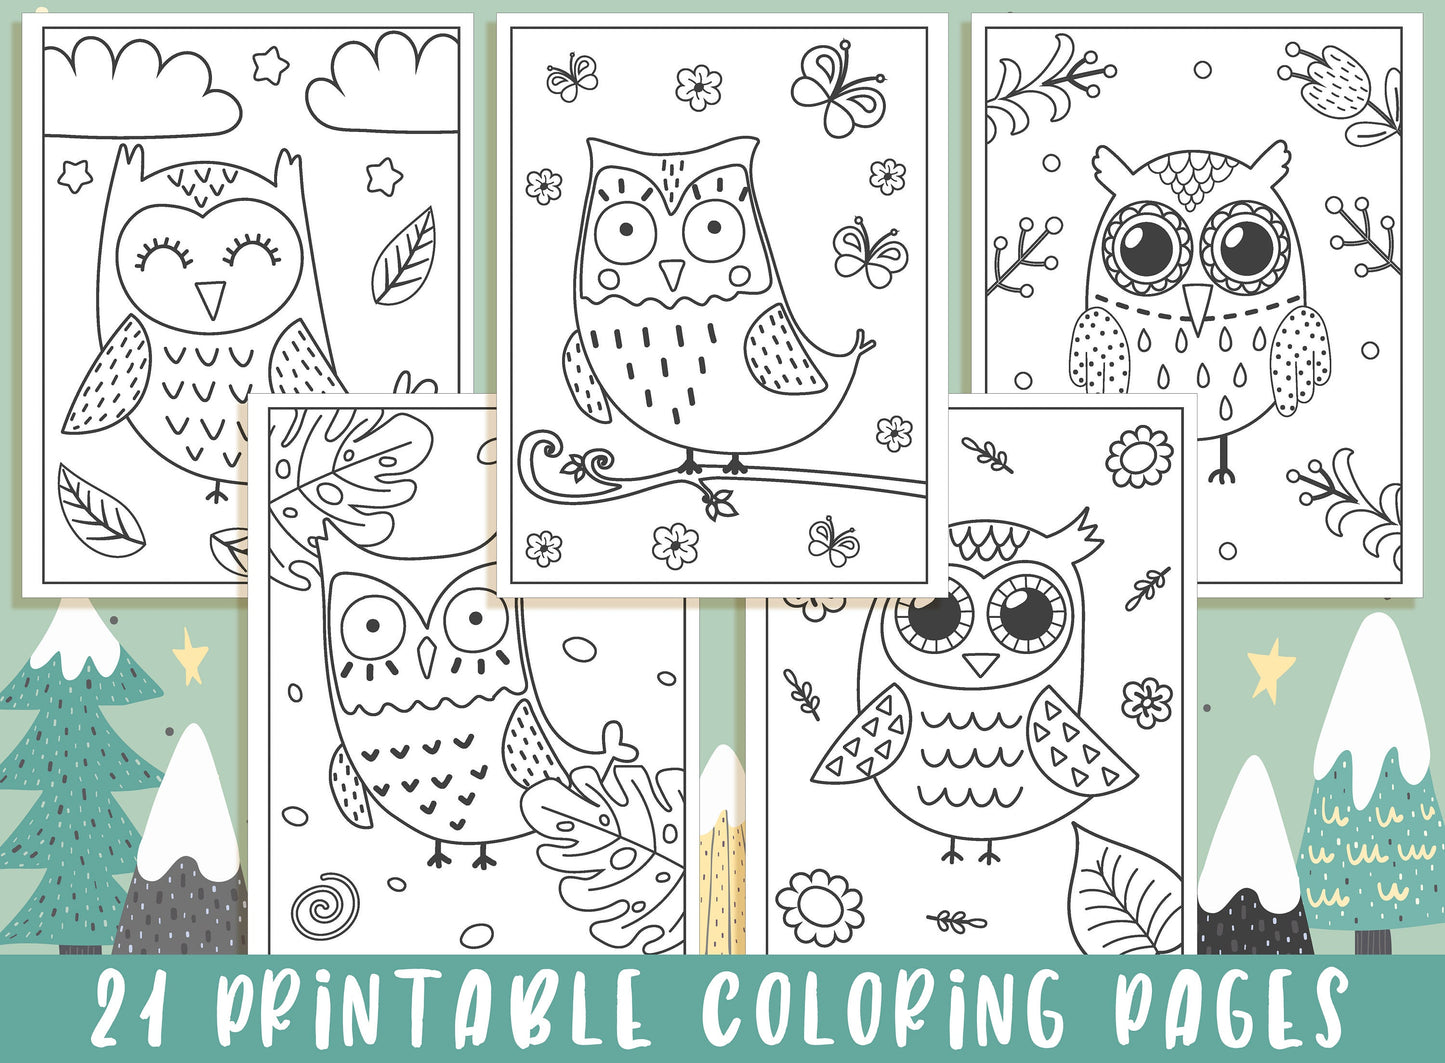 Owl Coloring Pages - 21 Printable Owl Coloring Pages for Kids, Boys, Girls, Teens, Owl Birthday Party Activity - Instant Download.